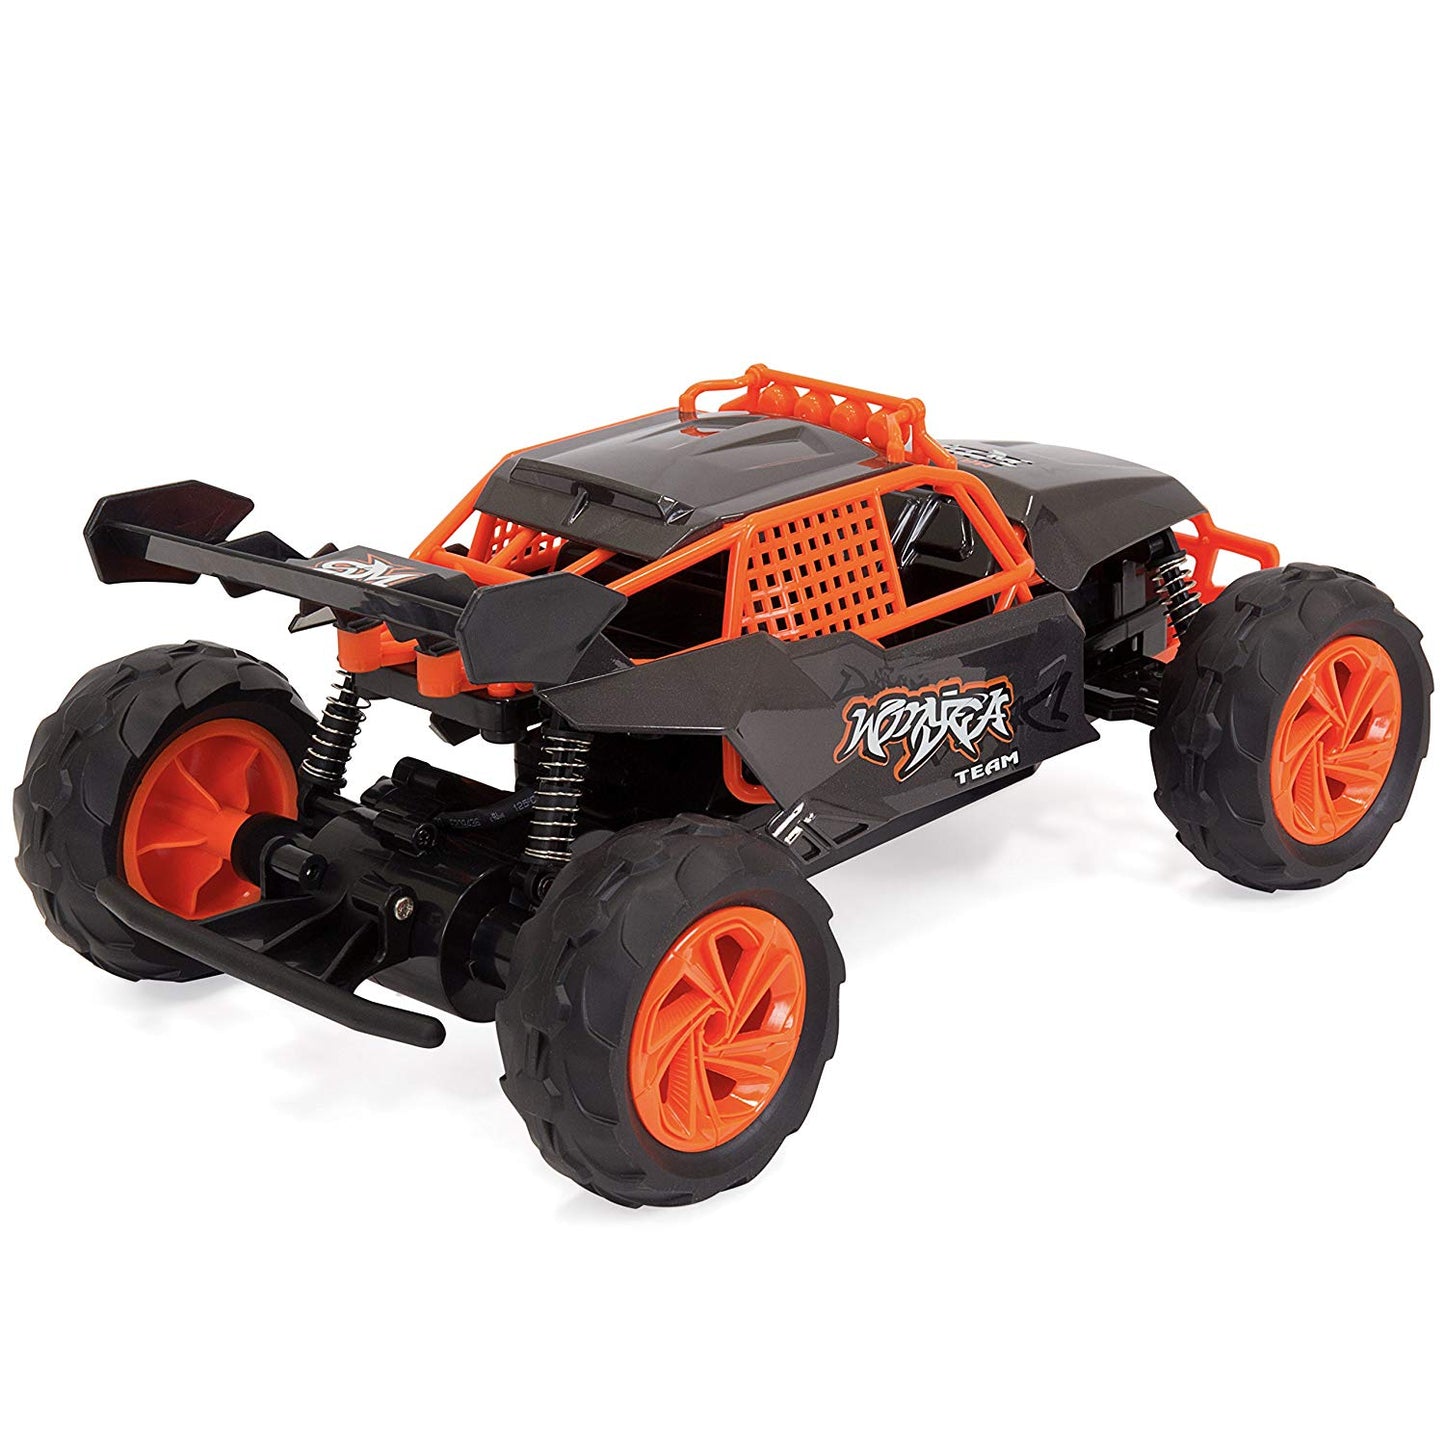 2.4G 1:14 High Speed Car with USB Charger (Black & Orange)